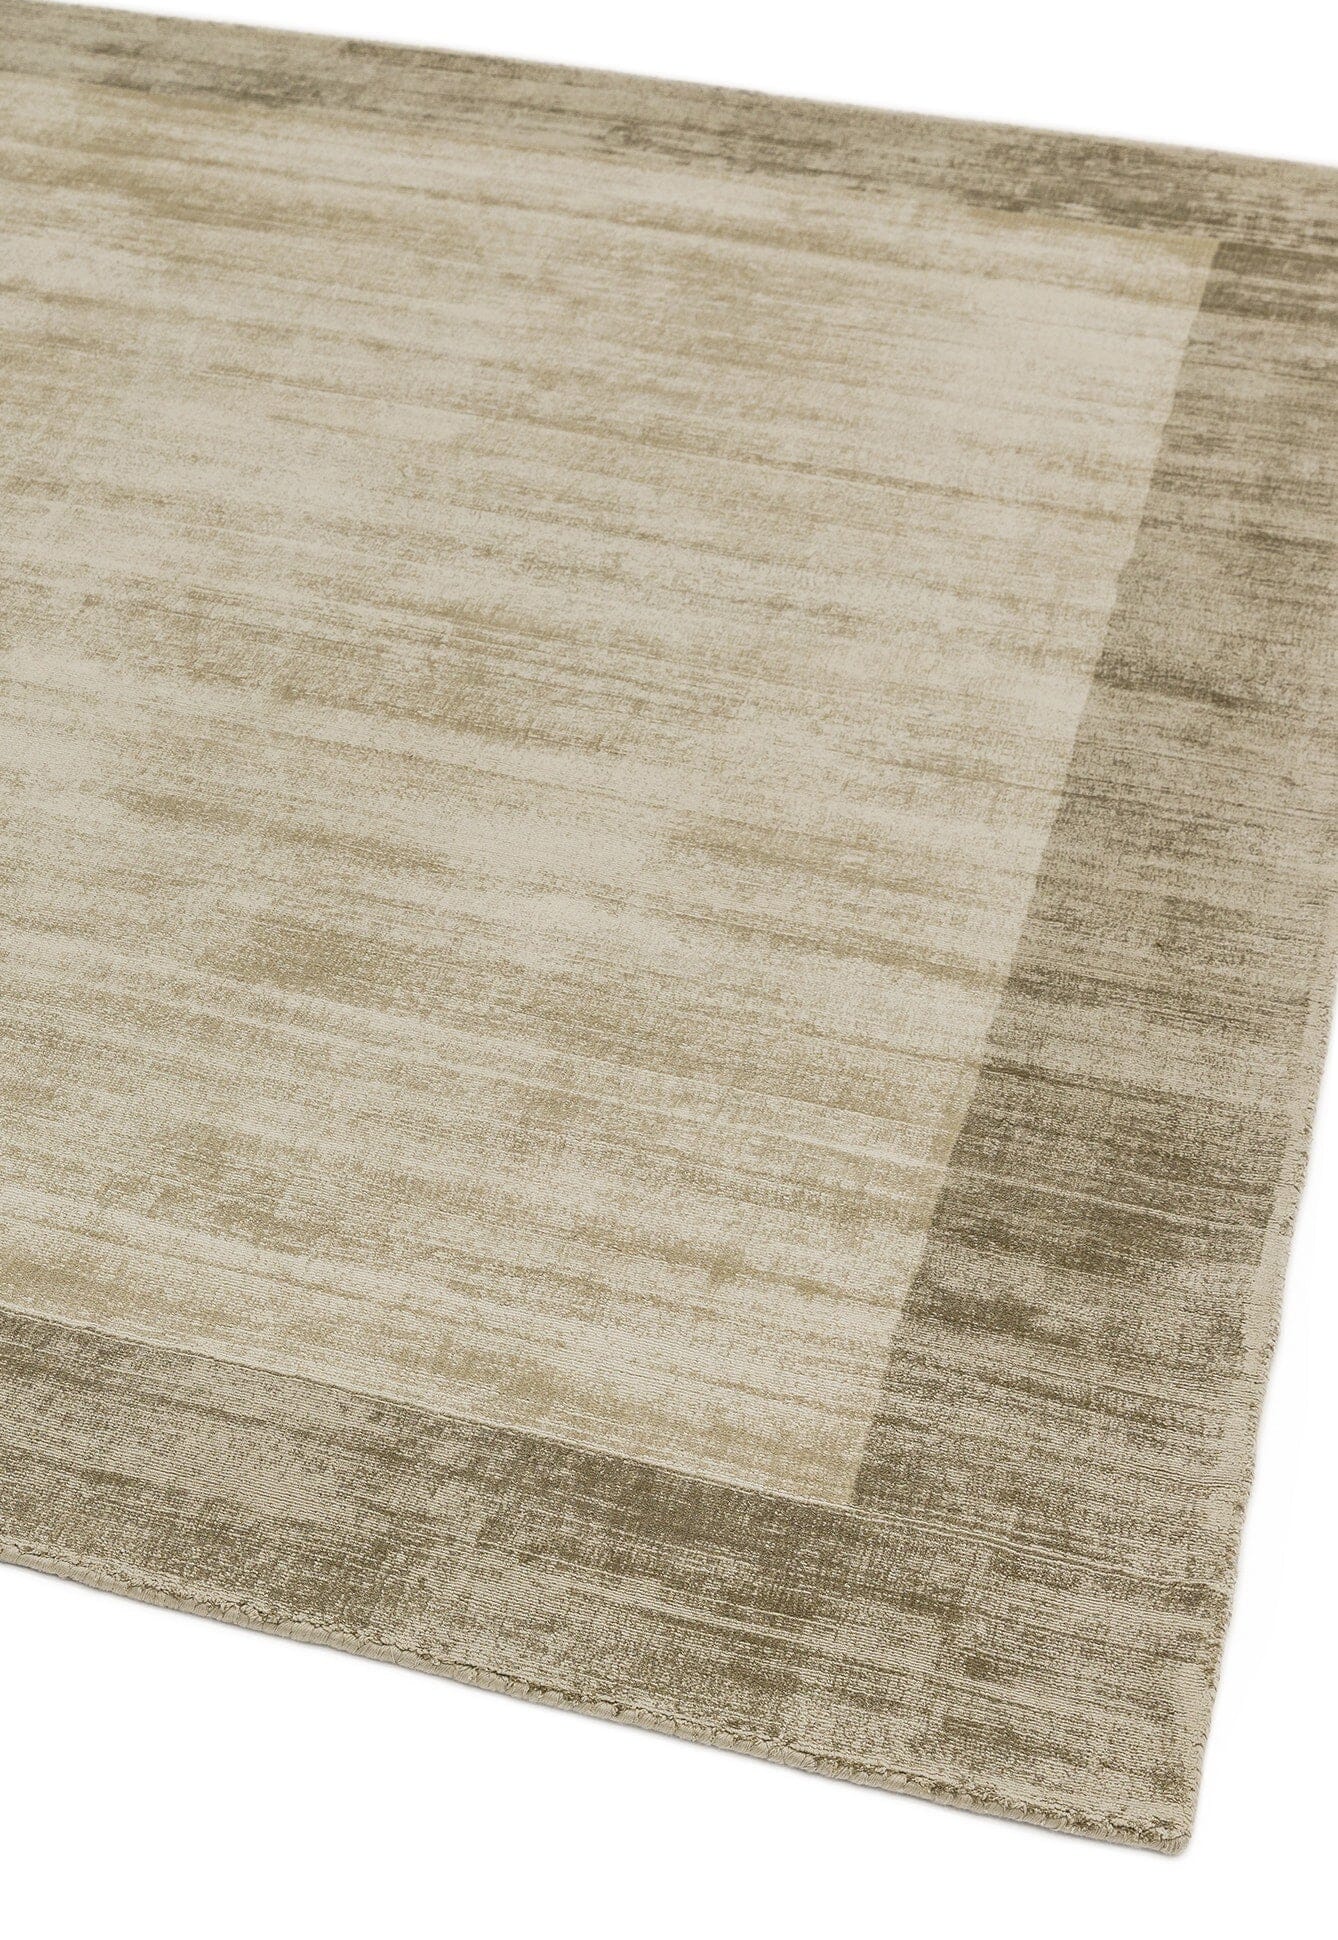 Asiatic Carpets Blade Hand Woven Rug Smoke Putty - 160 x 160cm